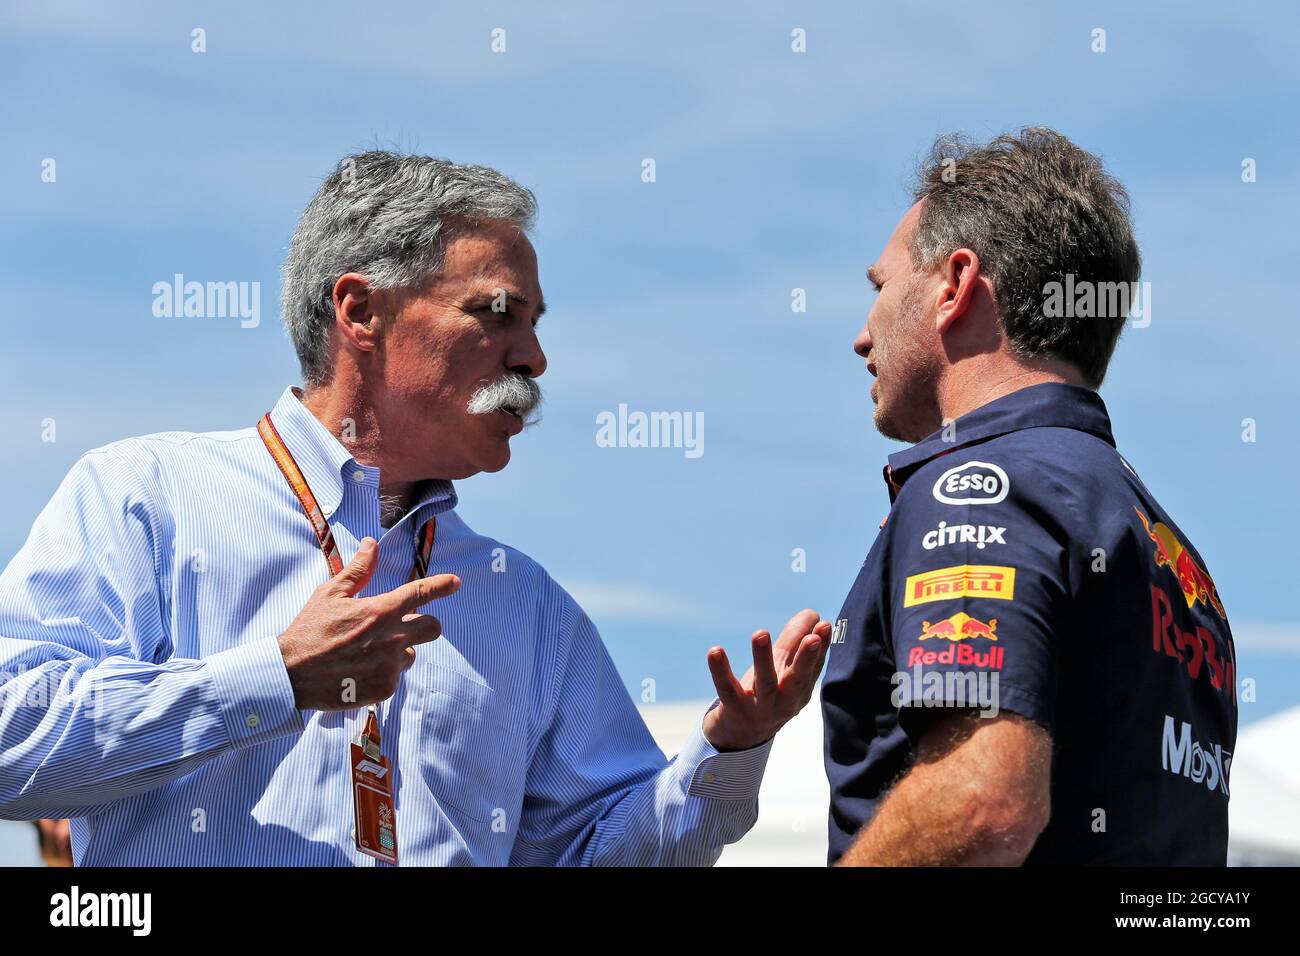 (L to R): Chase Carey (USA) Formula One Group Chairman with Christian Horner (GBR) Red Bull Racing Team Principal. French Grand Prix, Friday 22nd June 2018. Paul Ricard, France. Stock Photo